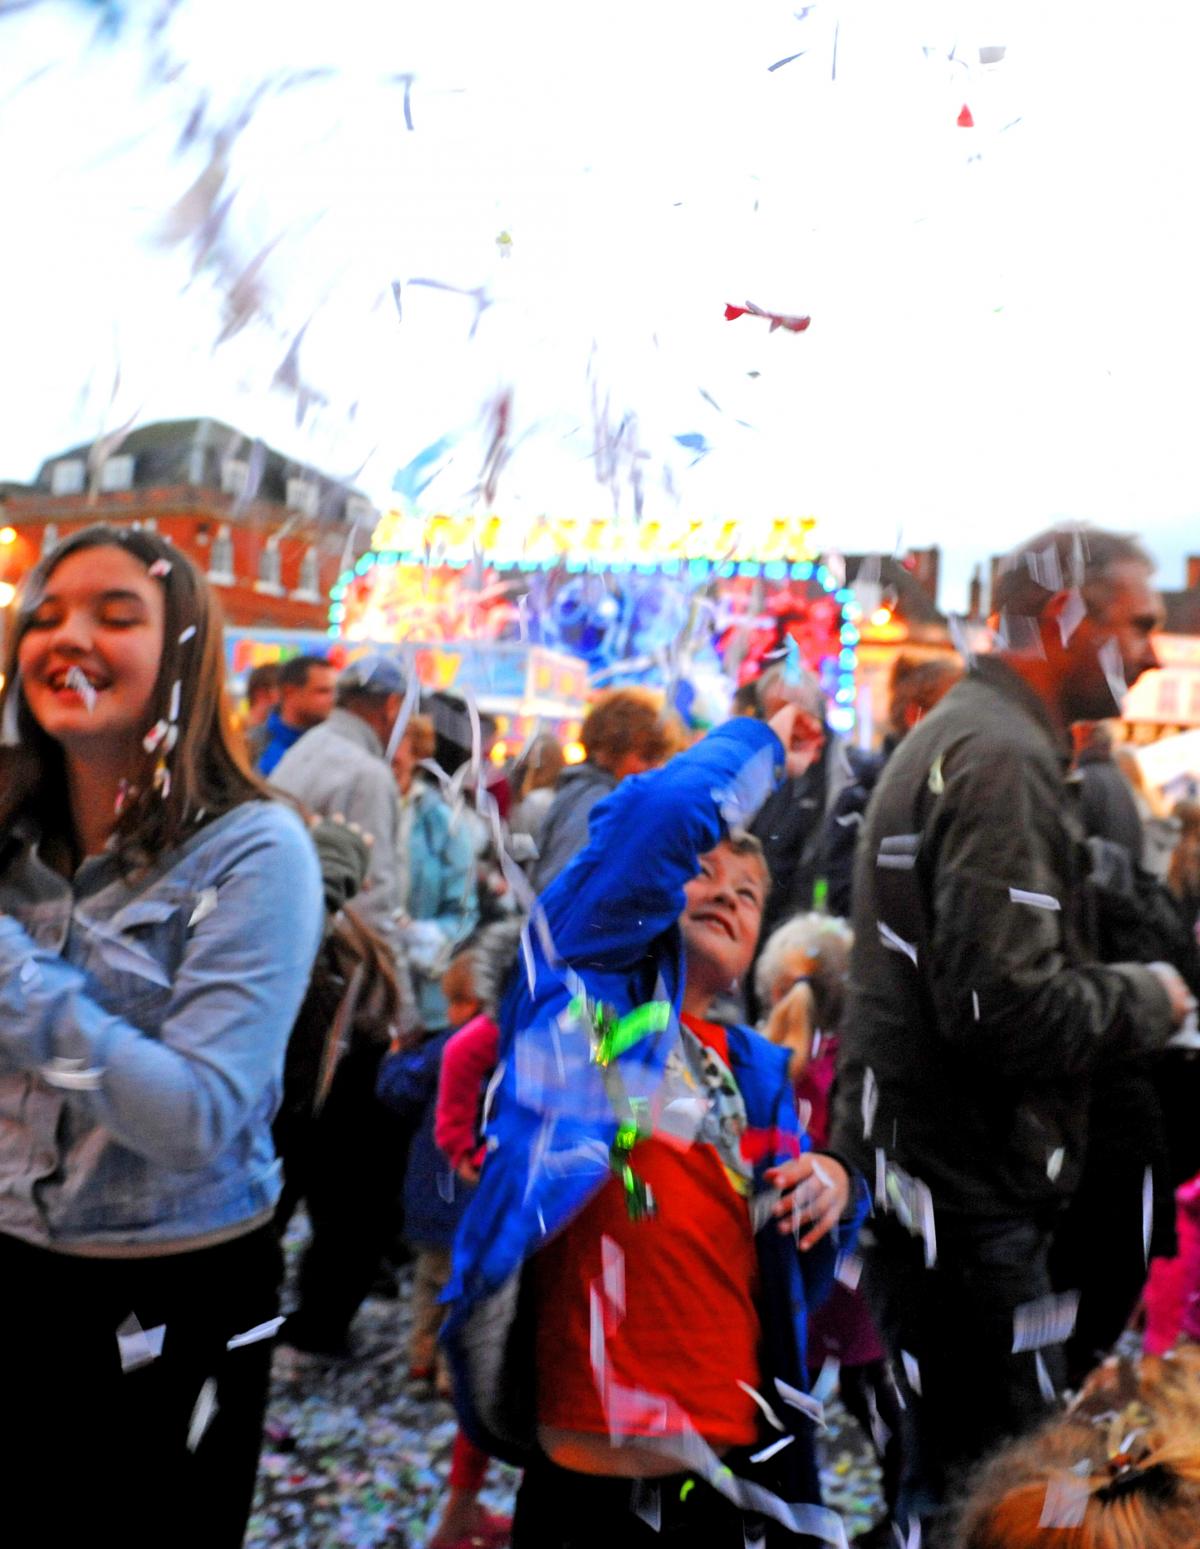 Siobhan Boyle gets in among the action at Devizes Confetti Battle, which kicks off Devizes Carnival celebrations